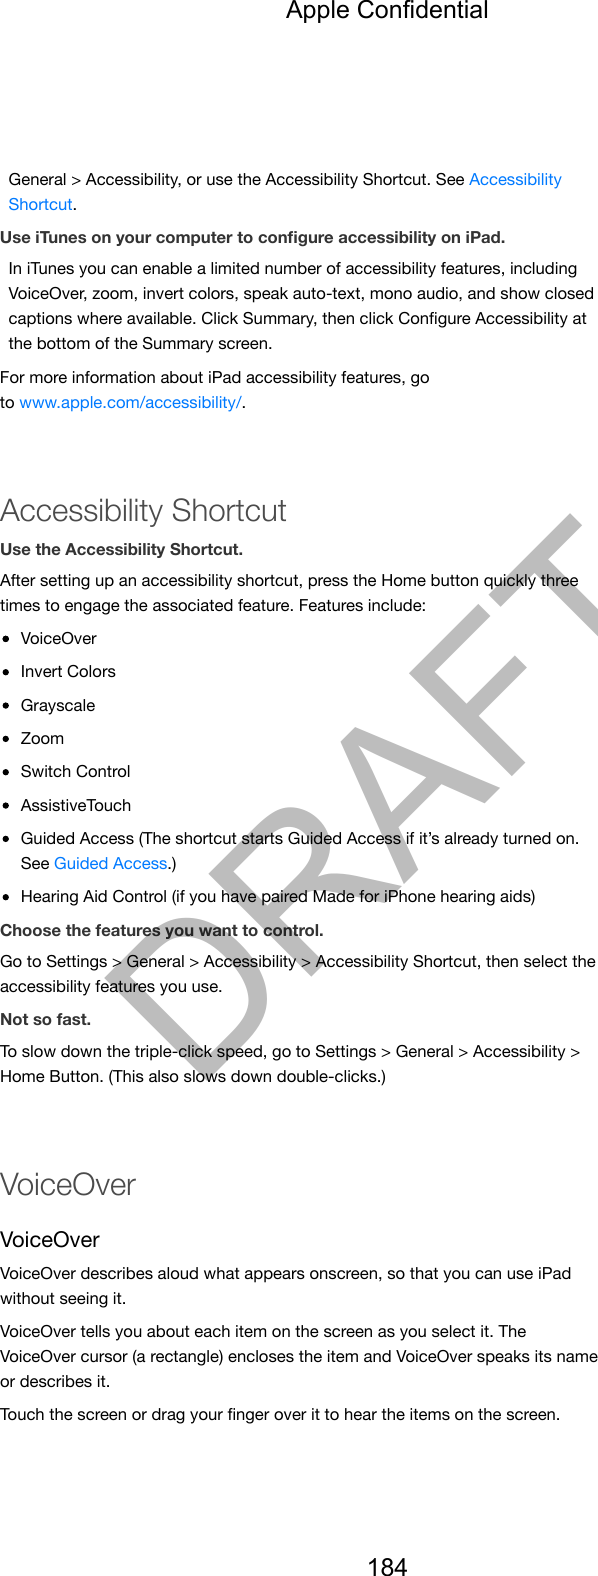 General &gt; Accessibility, or use the Accessibility Shortcut. See AccessibilityShortcut.Use iTunes on your computer to conﬁgure accessibility on iPad.In iTunes you can enable a limited number of accessibility features, includingVoiceOver, zoom, invert colors, speak auto-text, mono audio, and show closedcaptions where available. Click Summary, then click Conﬁgure Accessibility atthe bottom of the Summary screen.For more information about iPad accessibility features, goto www.apple.com/accessibility/.Accessibility ShortcutUse the Accessibility Shortcut.After setting up an accessibility shortcut, press the Home button quickly threetimes to engage the associated feature. Features include:VoiceOverInvert ColorsGrayscaleZoomSwitch ControlAssistiveTouchGuided Access (The shortcut starts Guided Access if it’s already turned on.See Guided Access.)Hearing Aid Control (if you have paired Made for iPhone hearing aids)Choose the features you want to control.Go to Settings &gt; General &gt; Accessibility &gt; Accessibility Shortcut, then select theaccessibility features you use.Not so fast.To slow down the triple-click speed, go to Settings &gt; General &gt; Accessibility &gt;Home Button. (This also slows down double-clicks.)VoiceOverVoiceOverVoiceOver describes aloud what appears onscreen, so that you can use iPadwithout seeing it.VoiceOver tells you about each item on the screen as you select it. TheVoiceOver cursor (a rectangle) encloses the item and VoiceOver speaks its nameor describes it.Touch the screen or drag your ﬁnger over it to hear the items on the screen.Apple Confidential184DRAFT